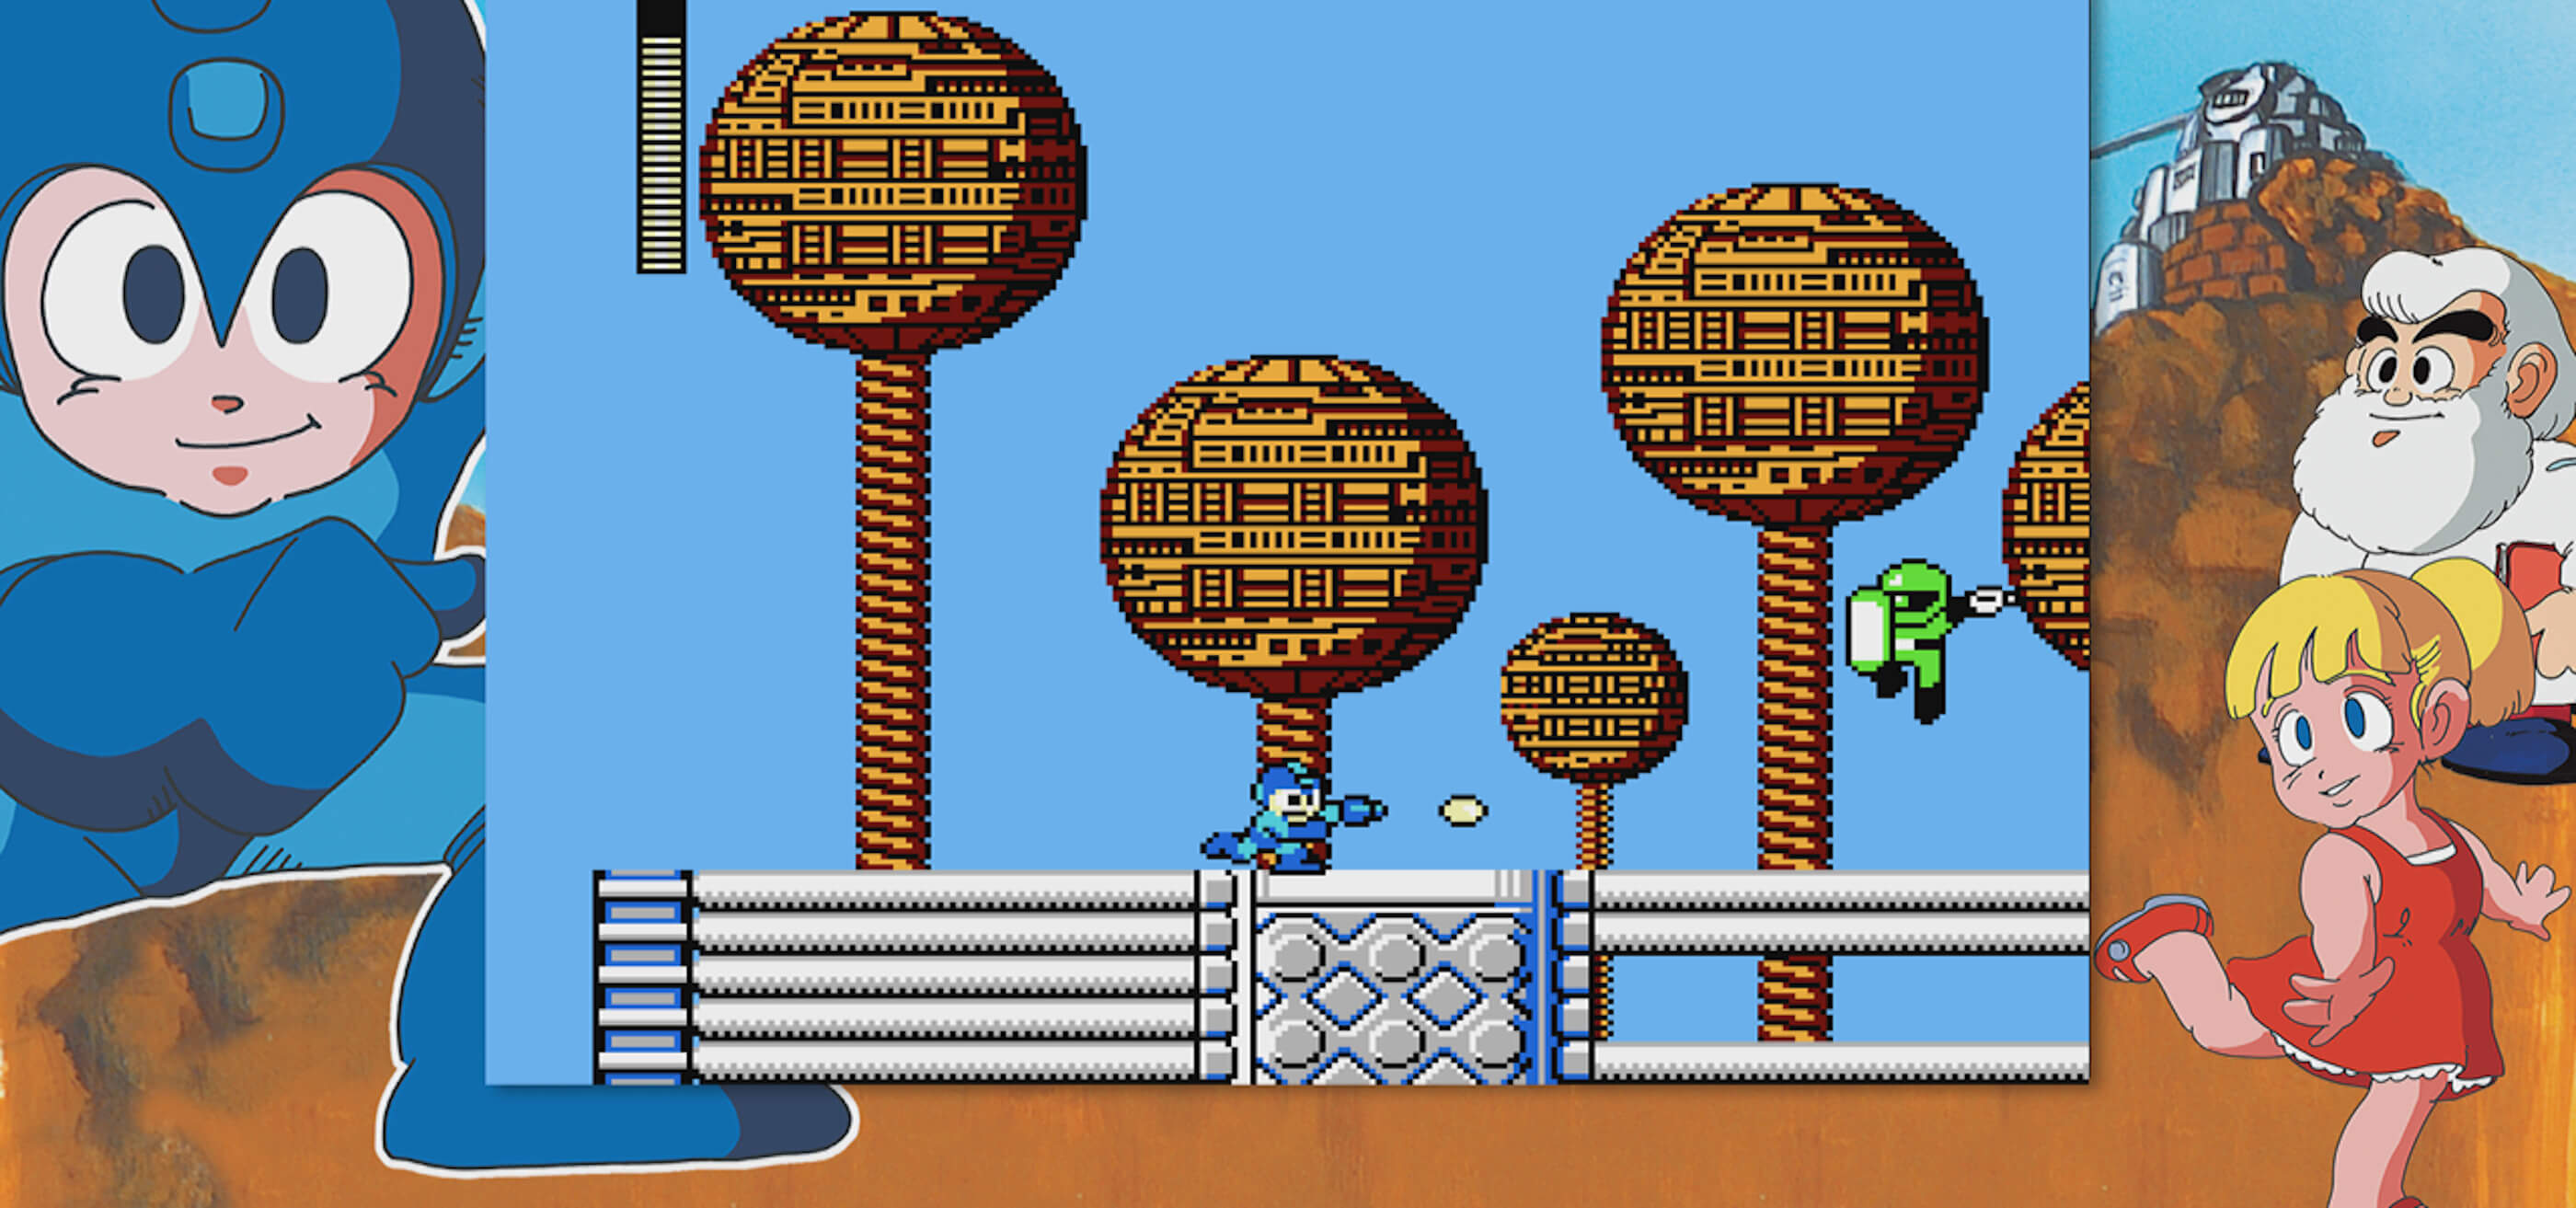 Partial screenshot from original Mega Man video game showing blue robot character running along a platform with spherical structures in the background.